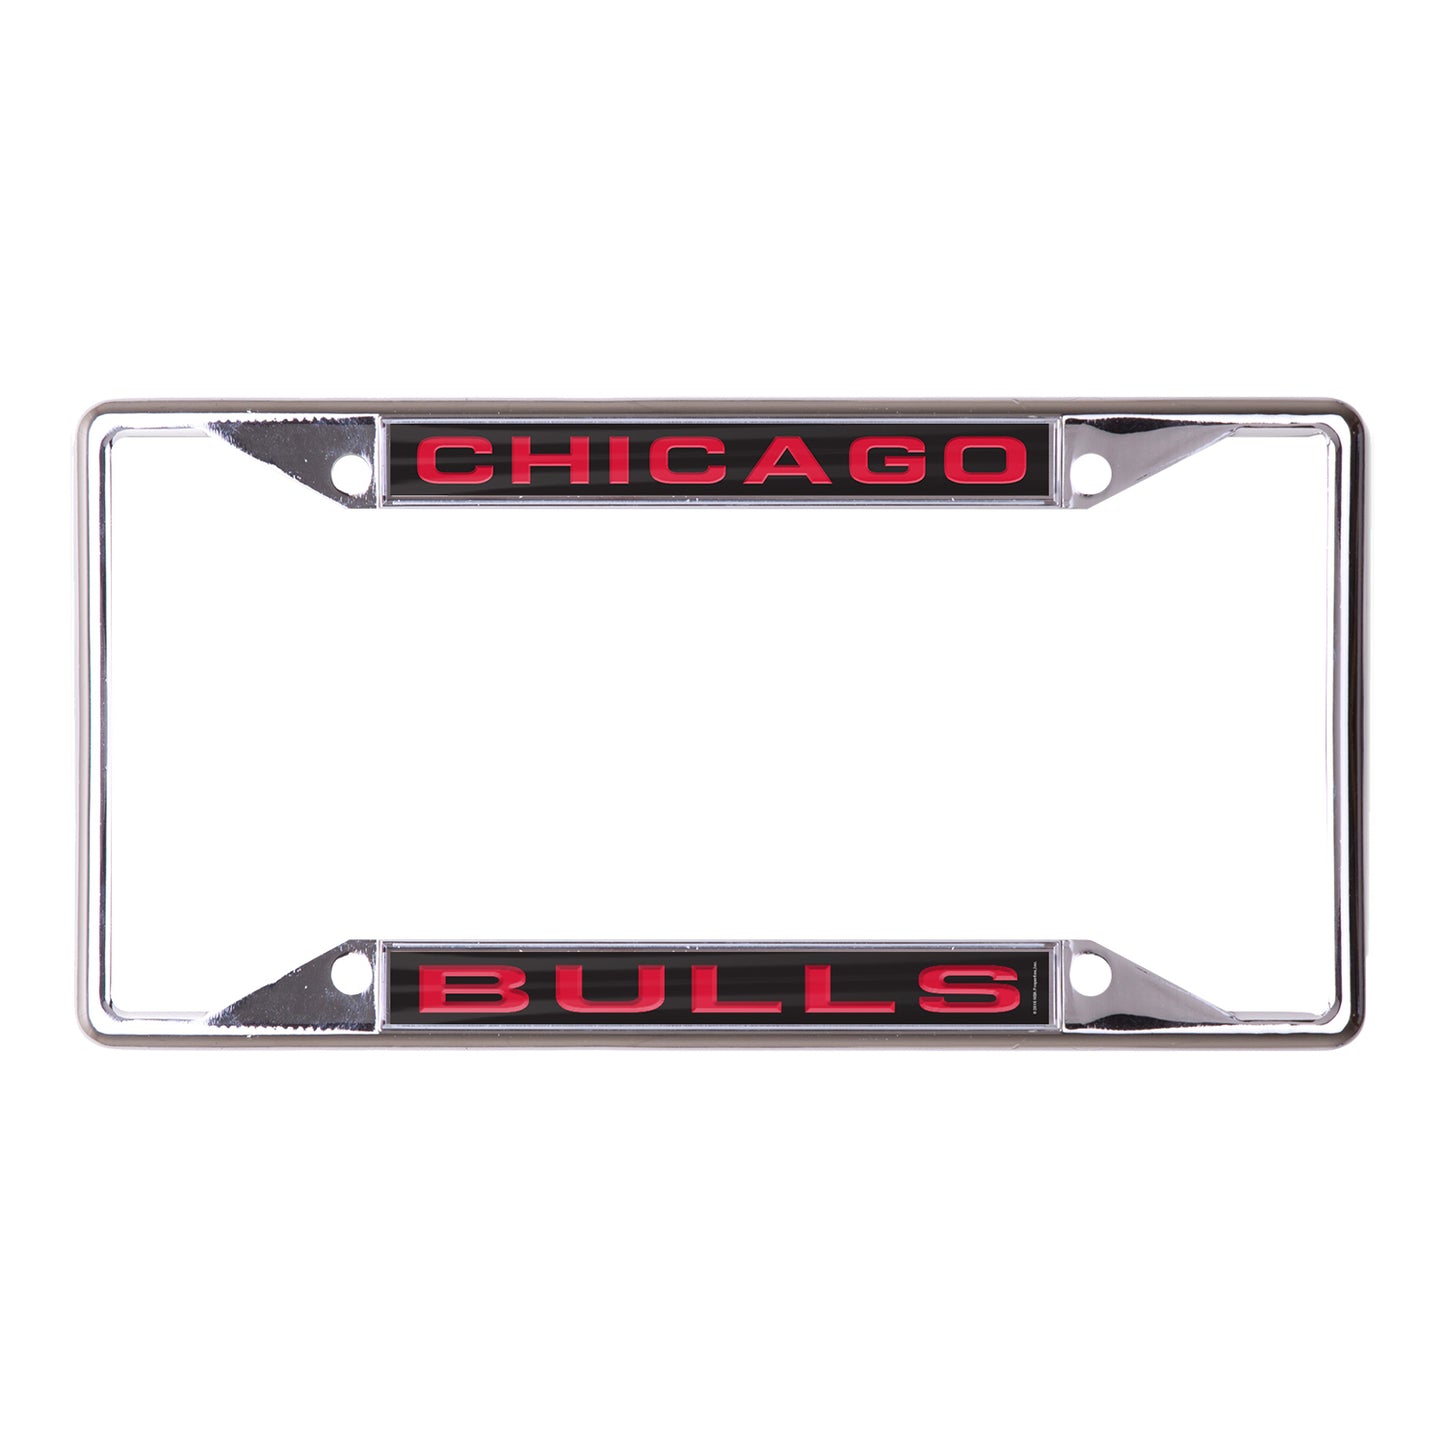 Chicago Bulls WinCraft License Plate Frame - front view